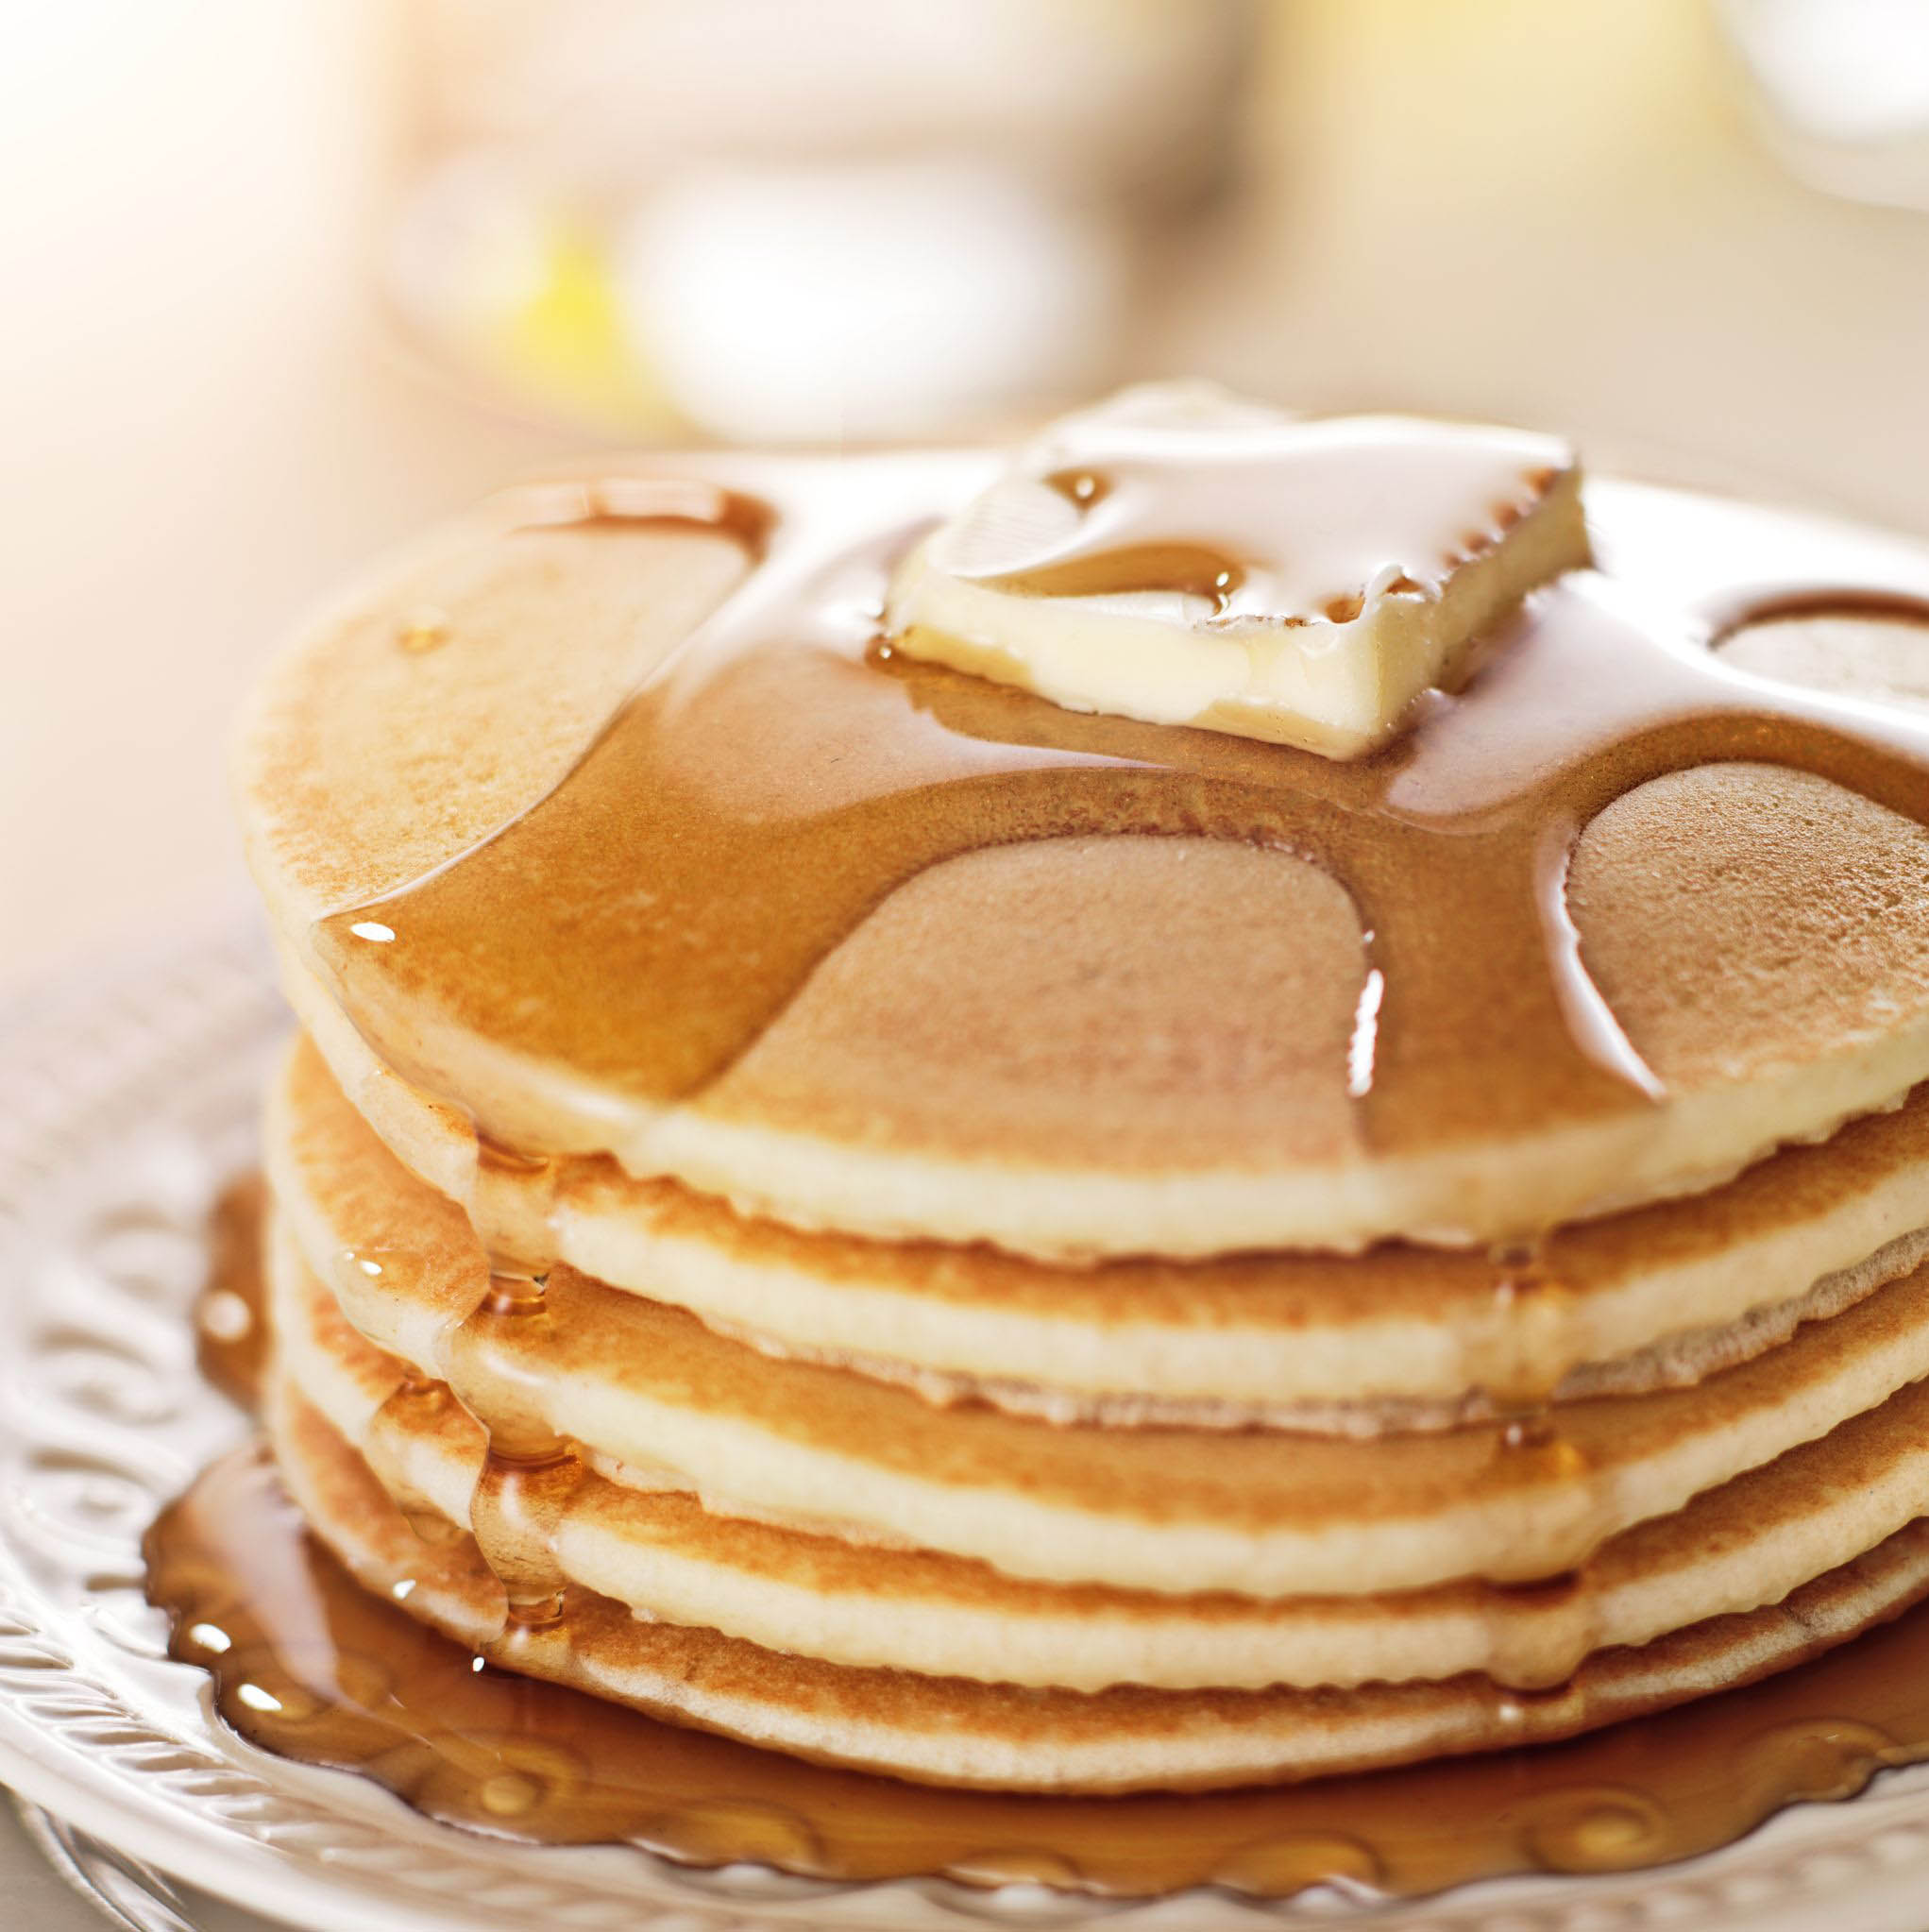 pancakes-and-syrup-california-united-states